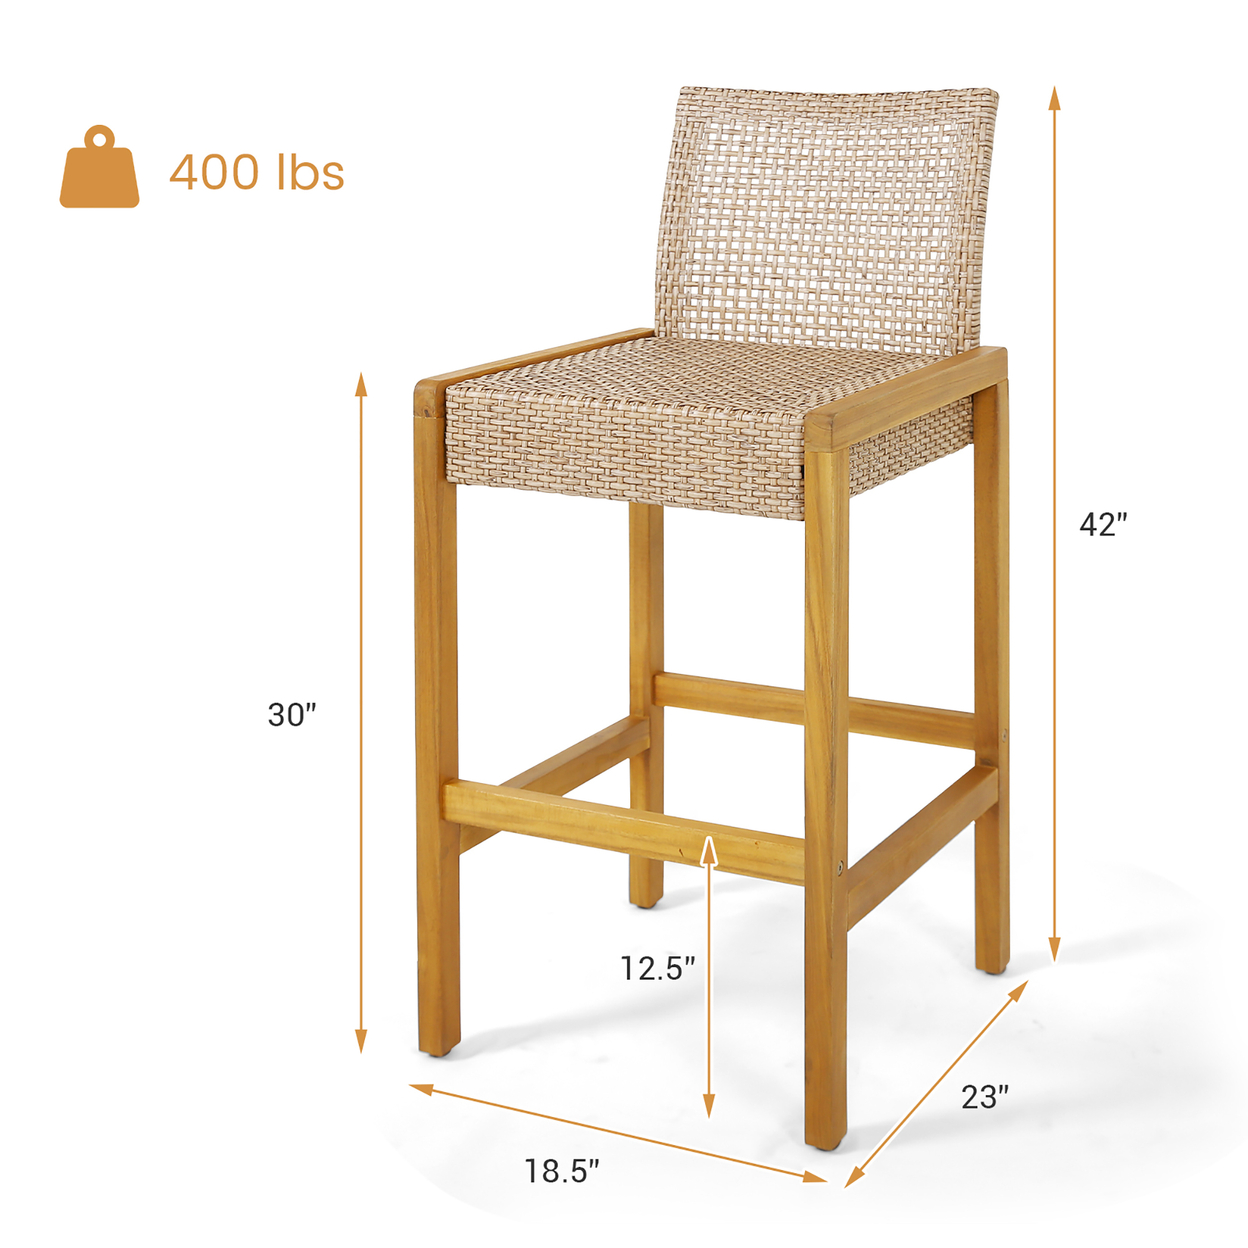 Wicker Bar Stools Set Of 2 Patio Chairs W/ Solid Wood Frame Ergonomic Footrest Light Brown